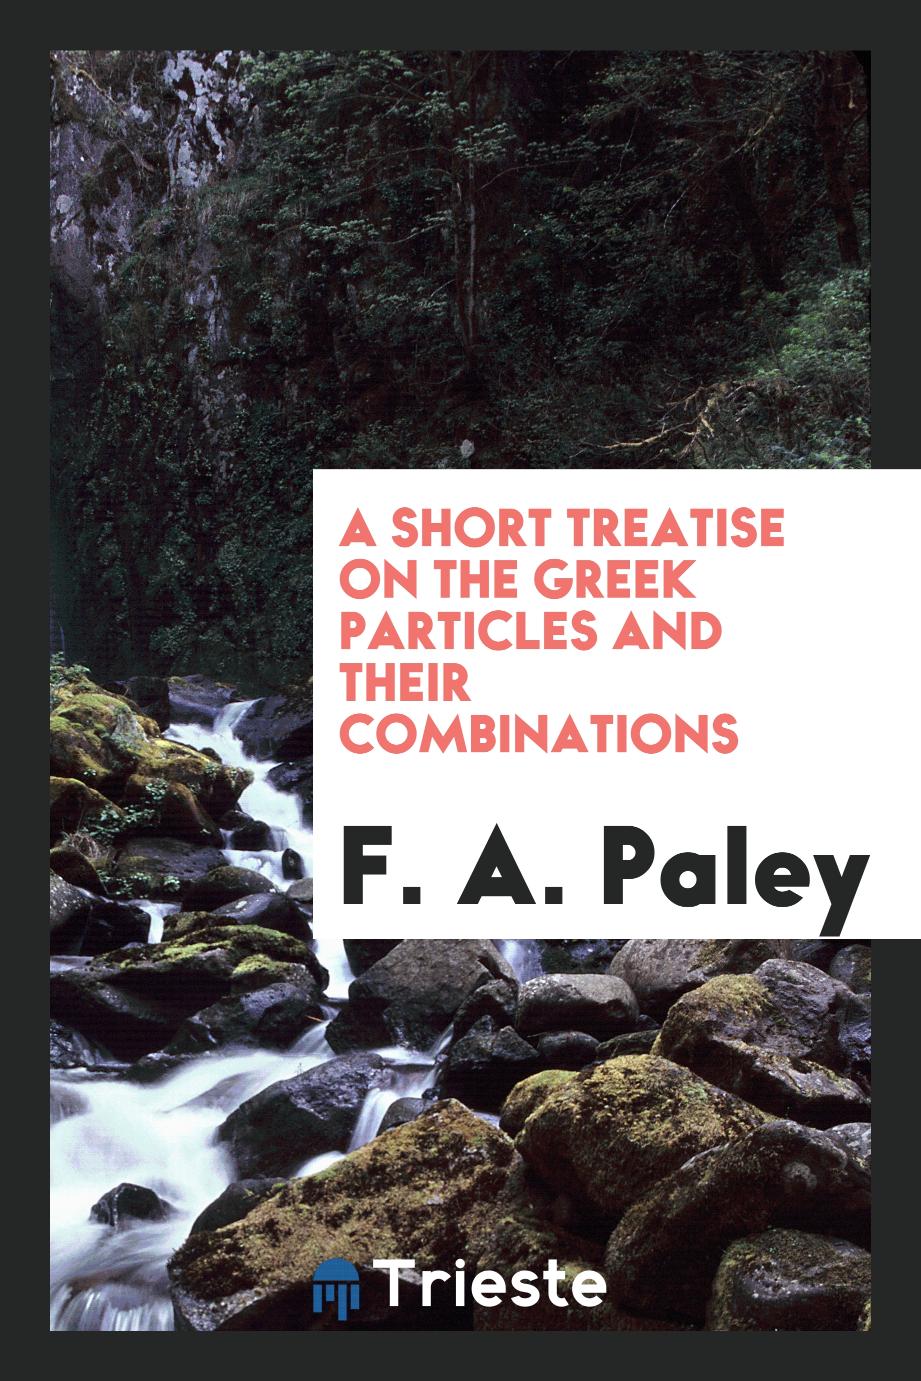 F. A. Paley - A Short Treatise on the Greek Particles and Their Combinations